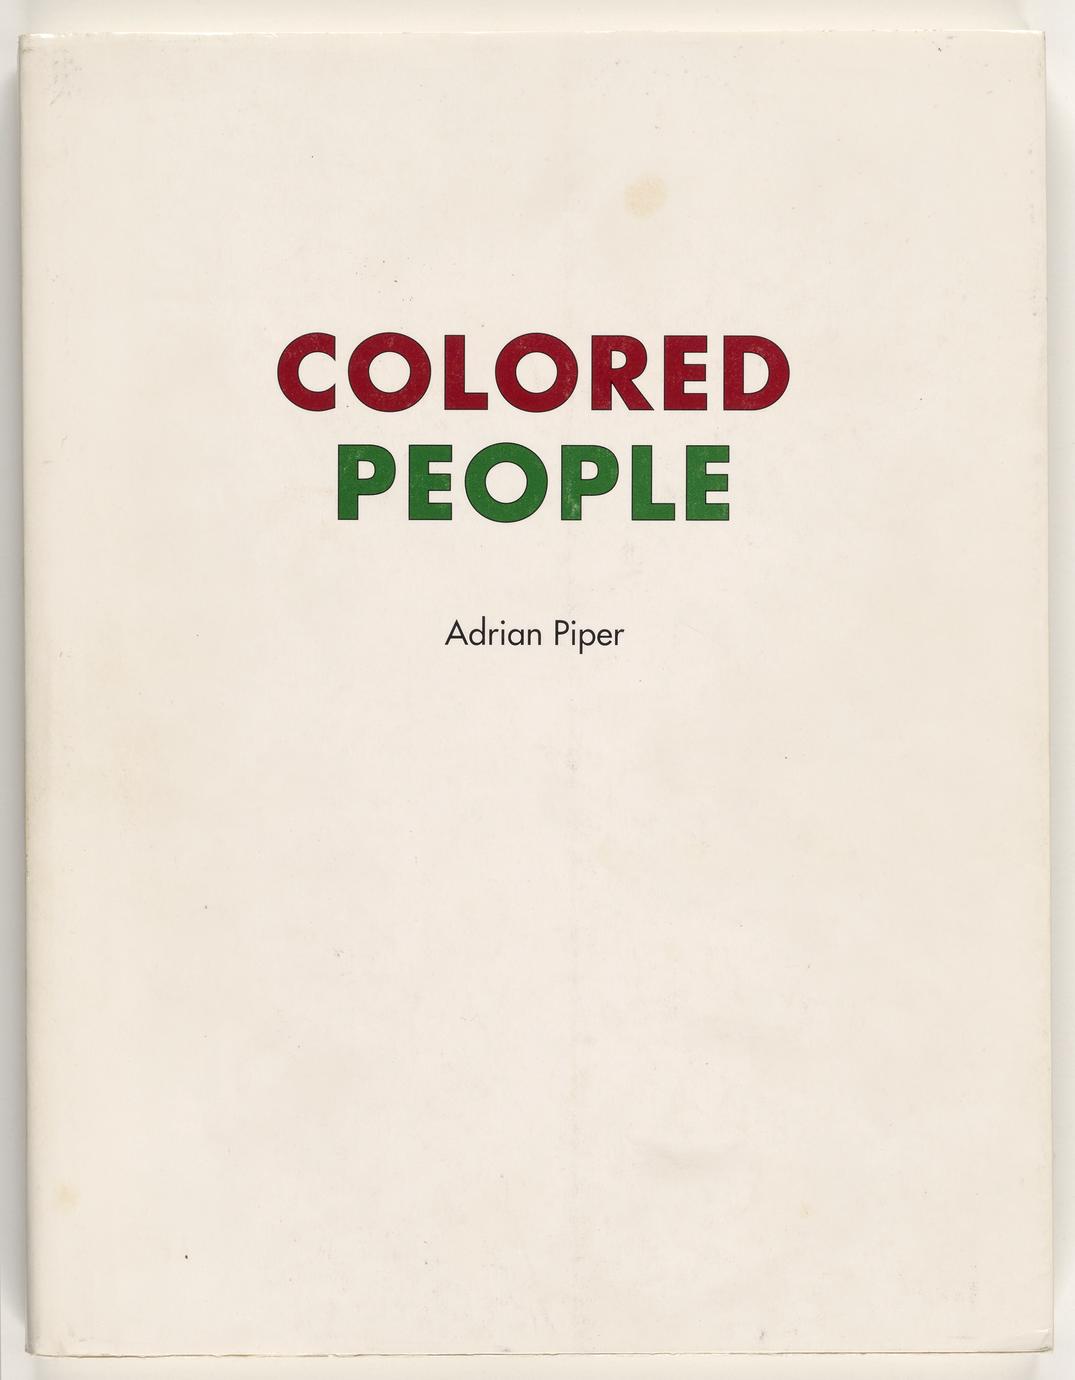 Colored people : a collaborative book project (1 of 5)